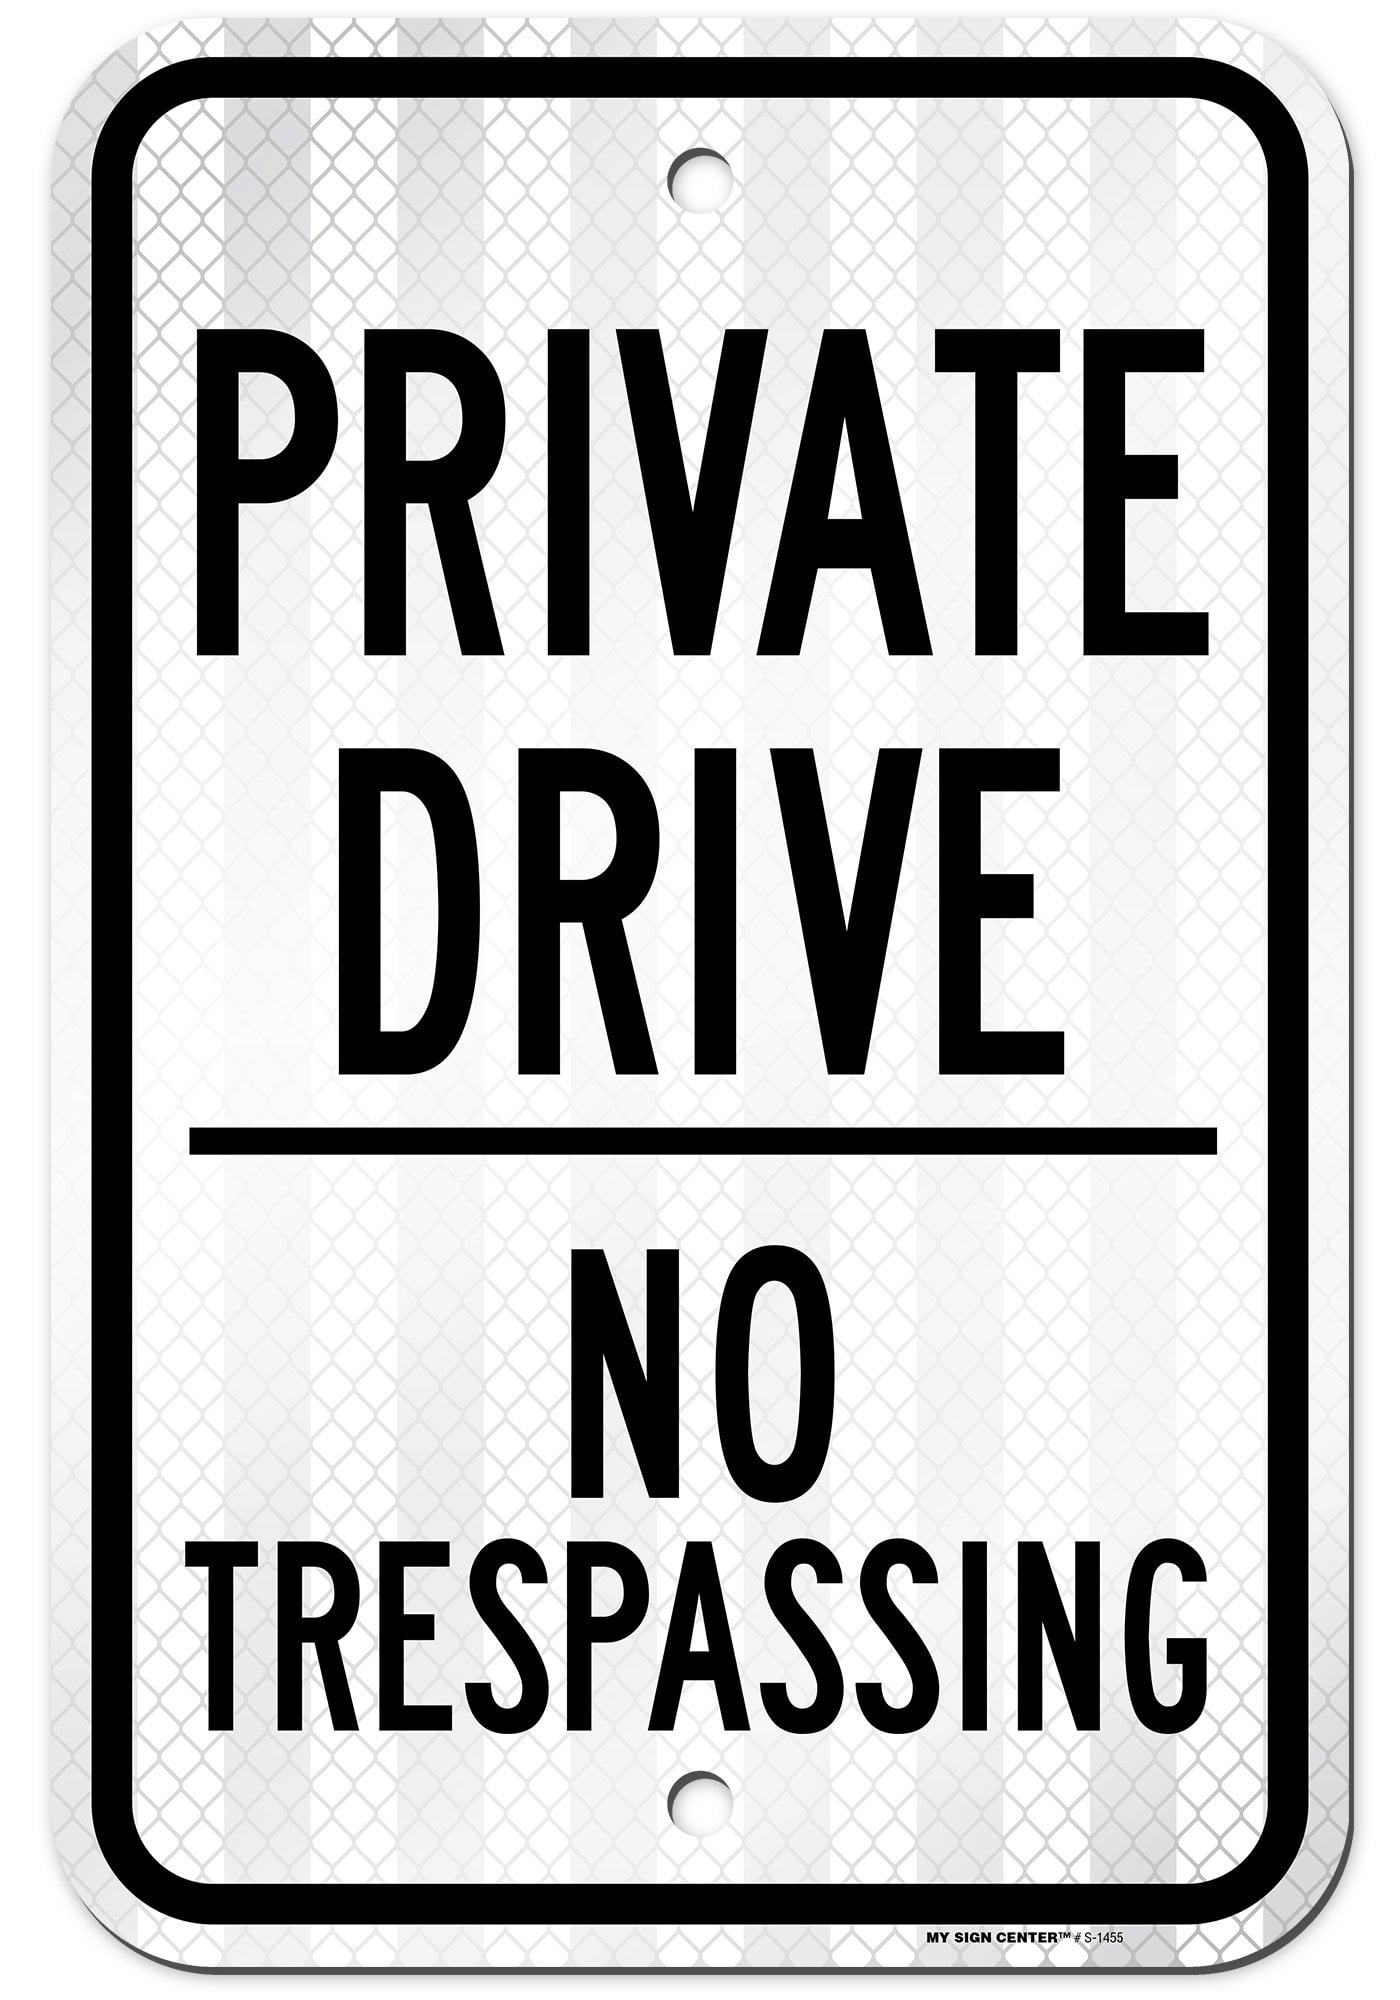 Private Drive DO NOT ENTER 8" x 12" Aluminum Sign Trespassing Made in the USA 